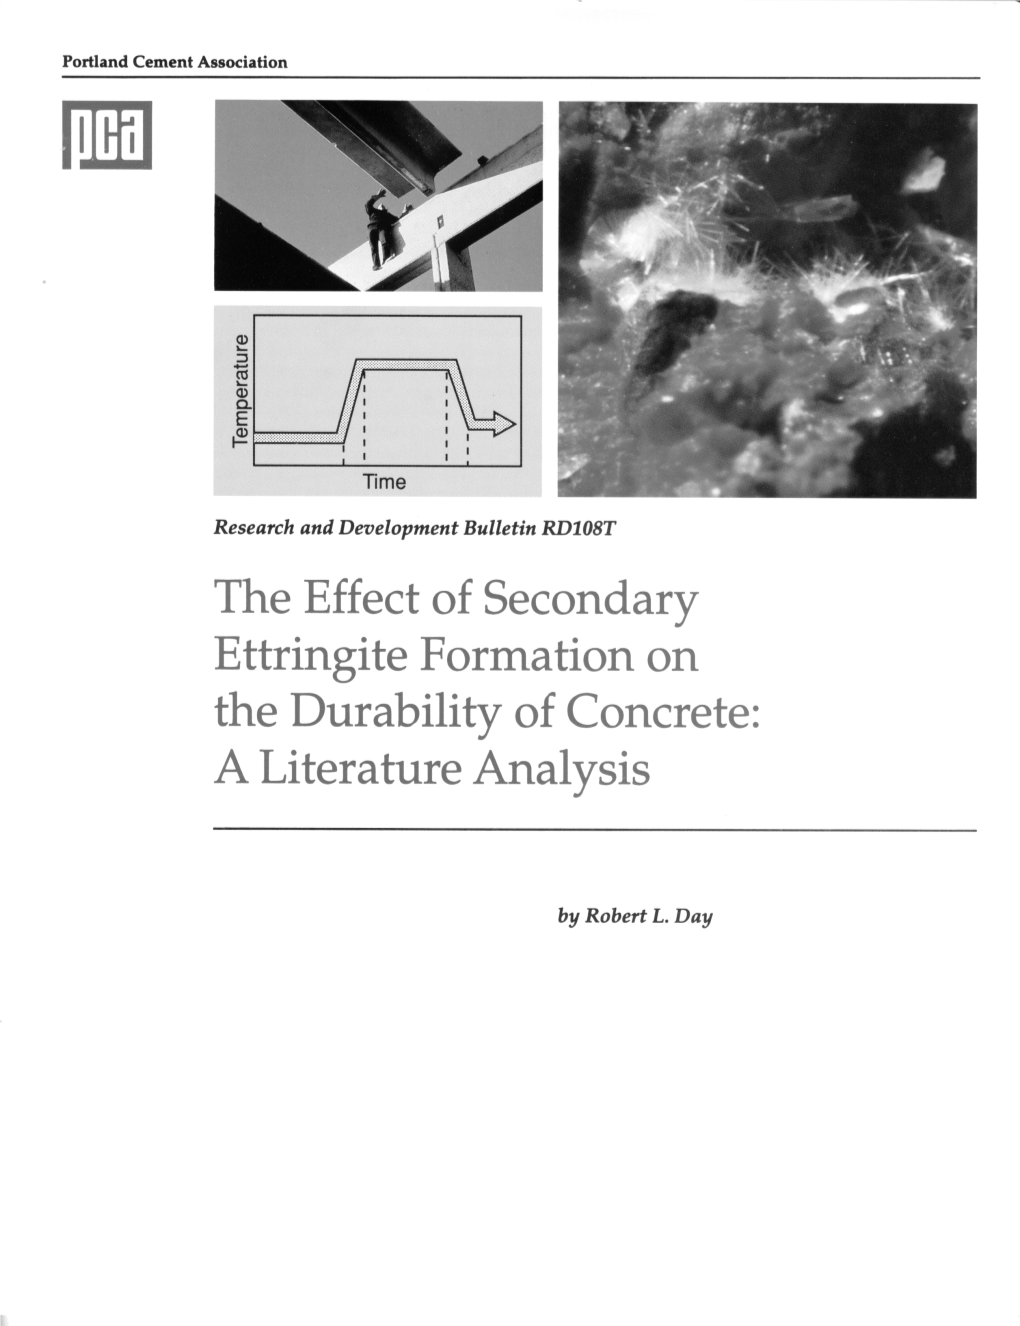 RD108-The Effect of Secondary Ettringite Formation on the Durability of Concrete-A Literature Analysis